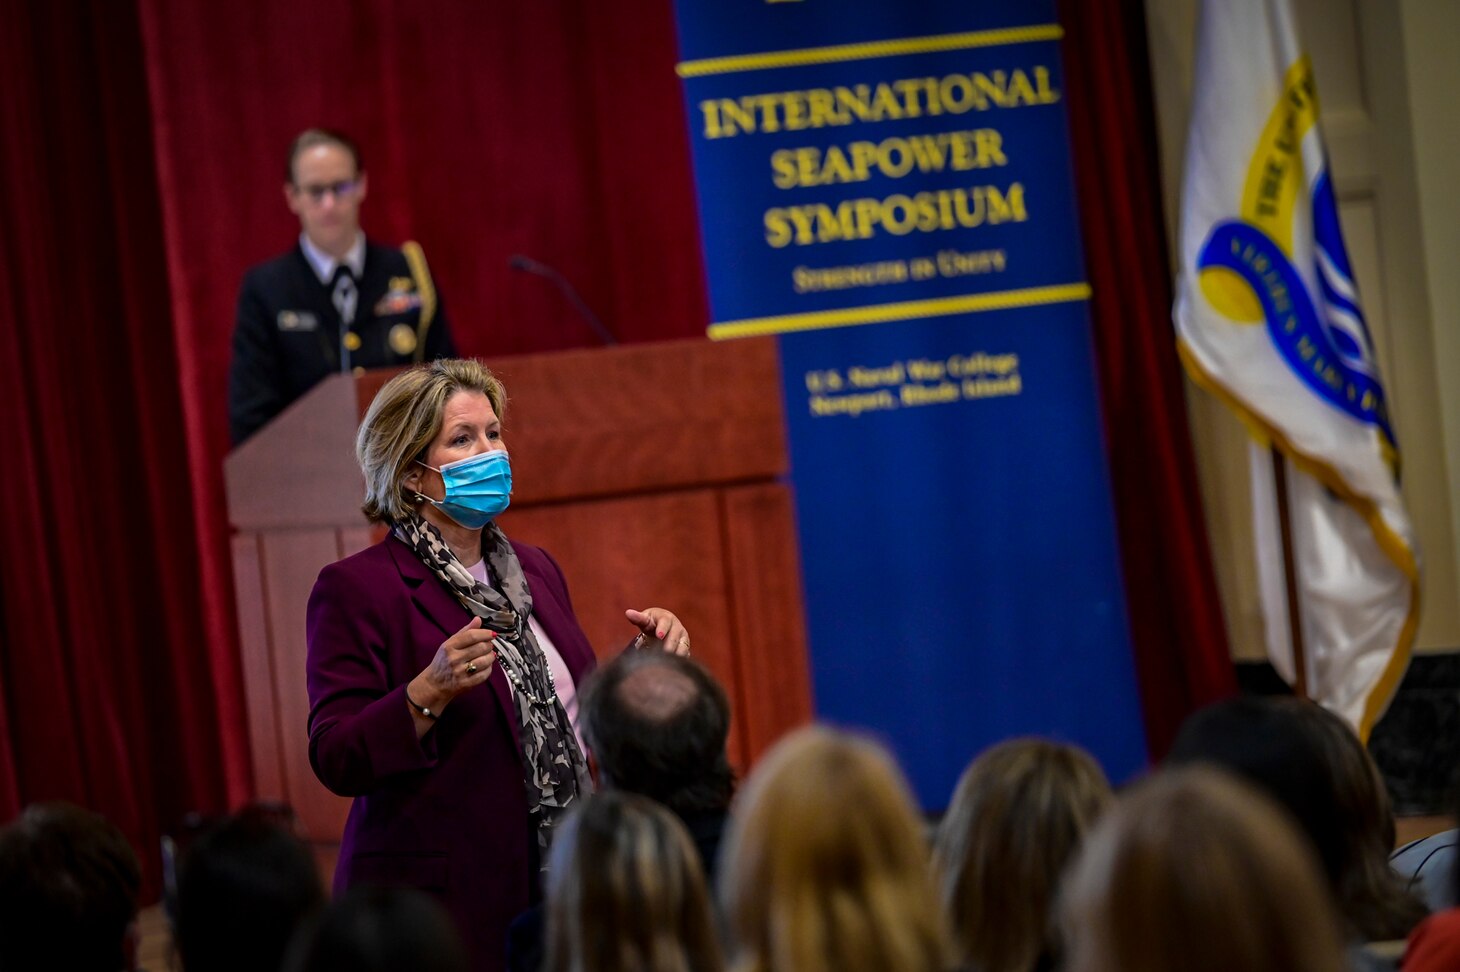 A woman wearing a blue face mask in a red blazer address a crowd in an auditorium, while another woman in uniform stands behind a podium. A banner in the background reads "International Seapower Symposium."